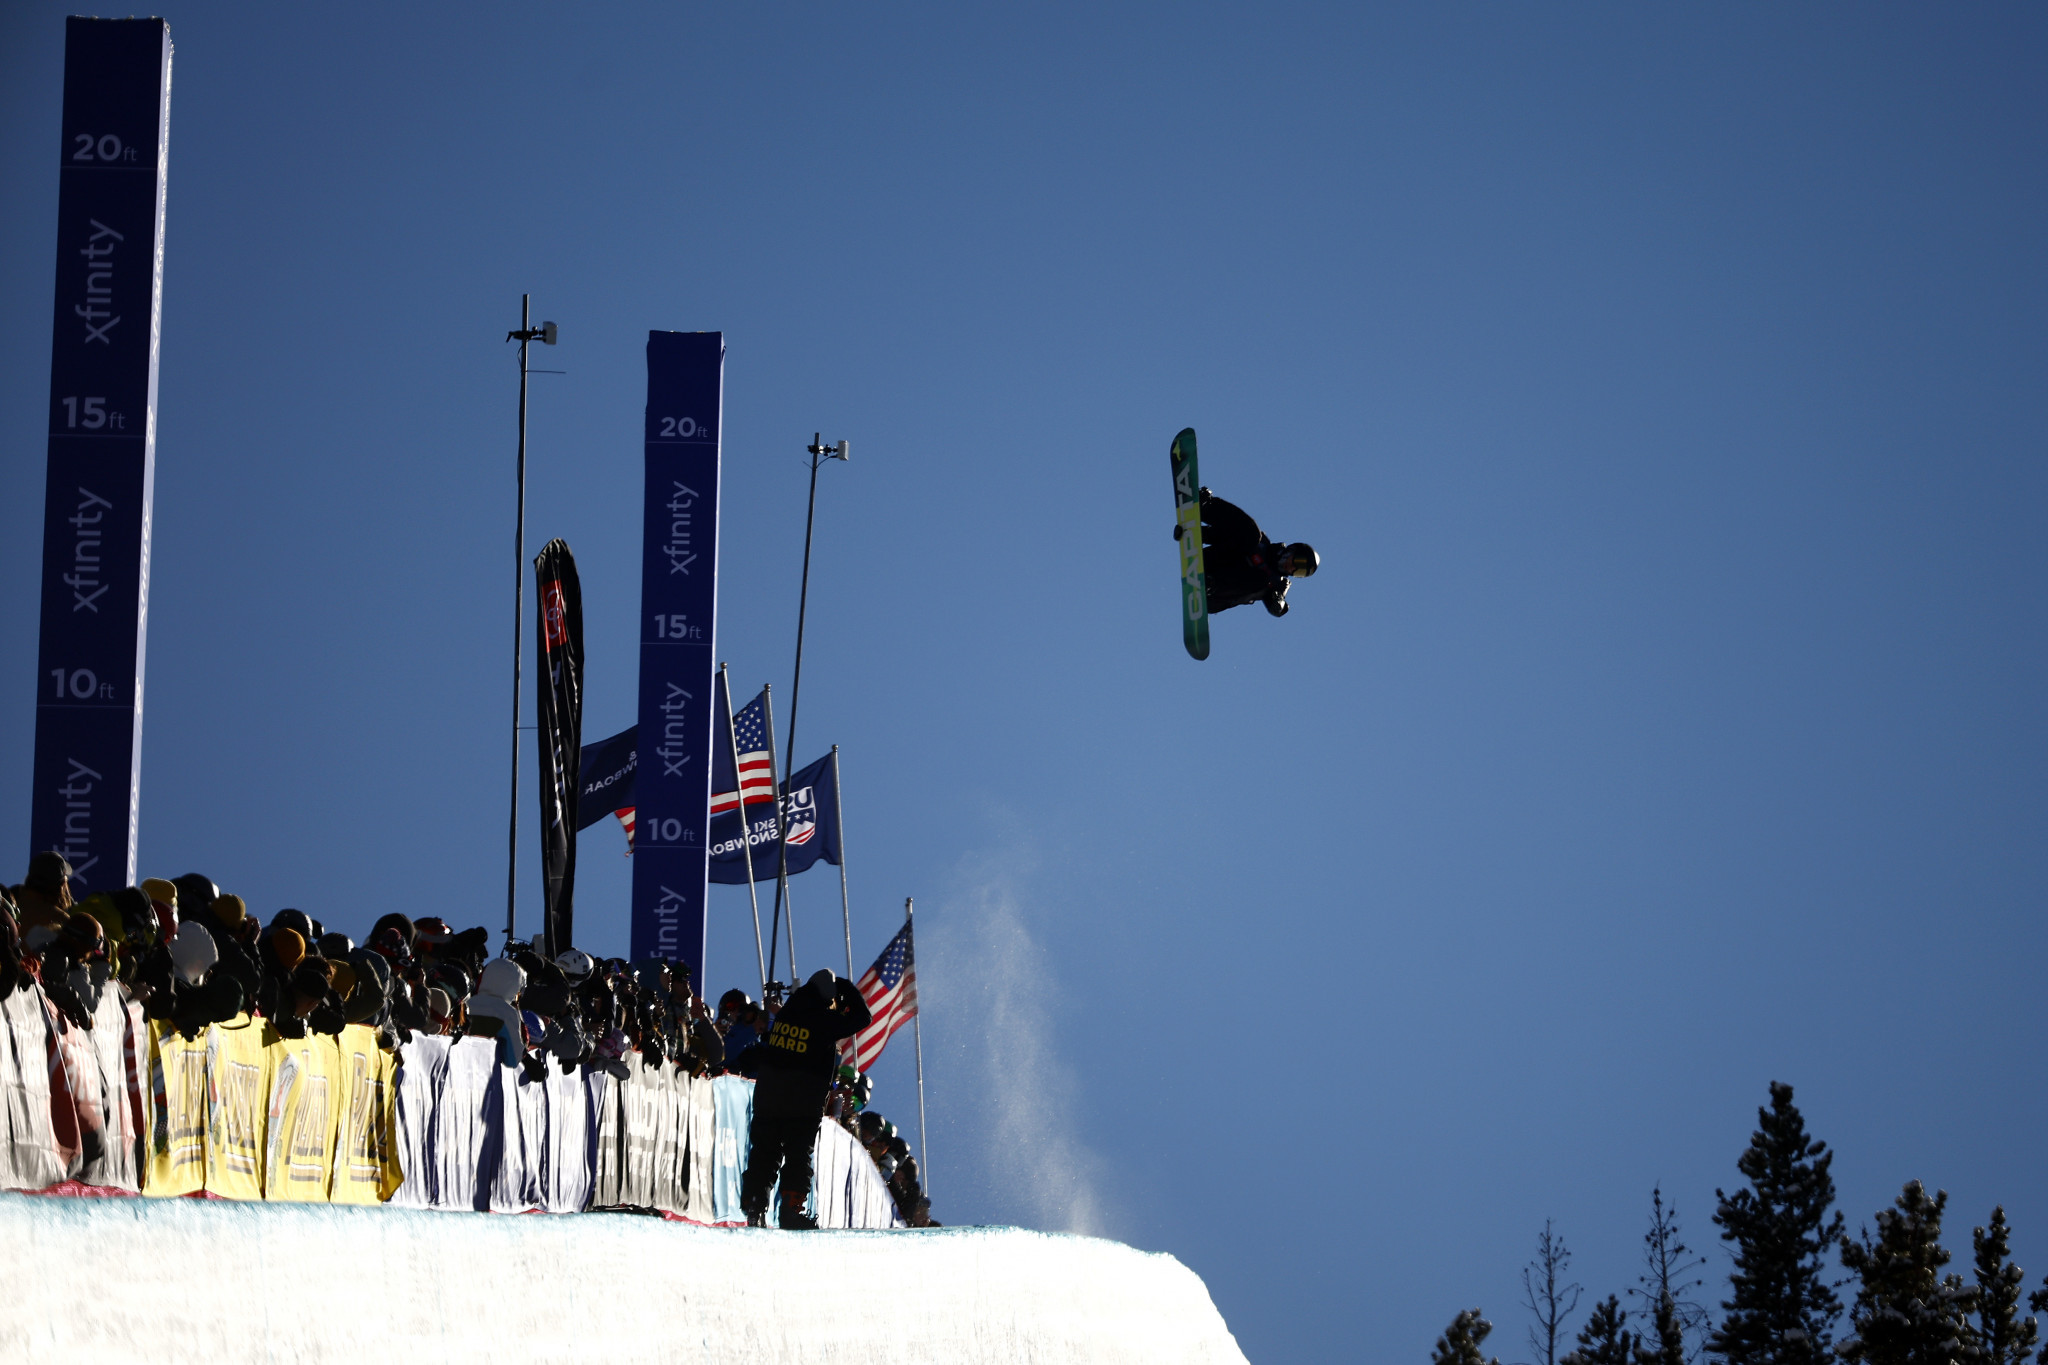 Russian athletes were unable to participate in the Freestyle World Cup in Copper Mountain ©Getty Images